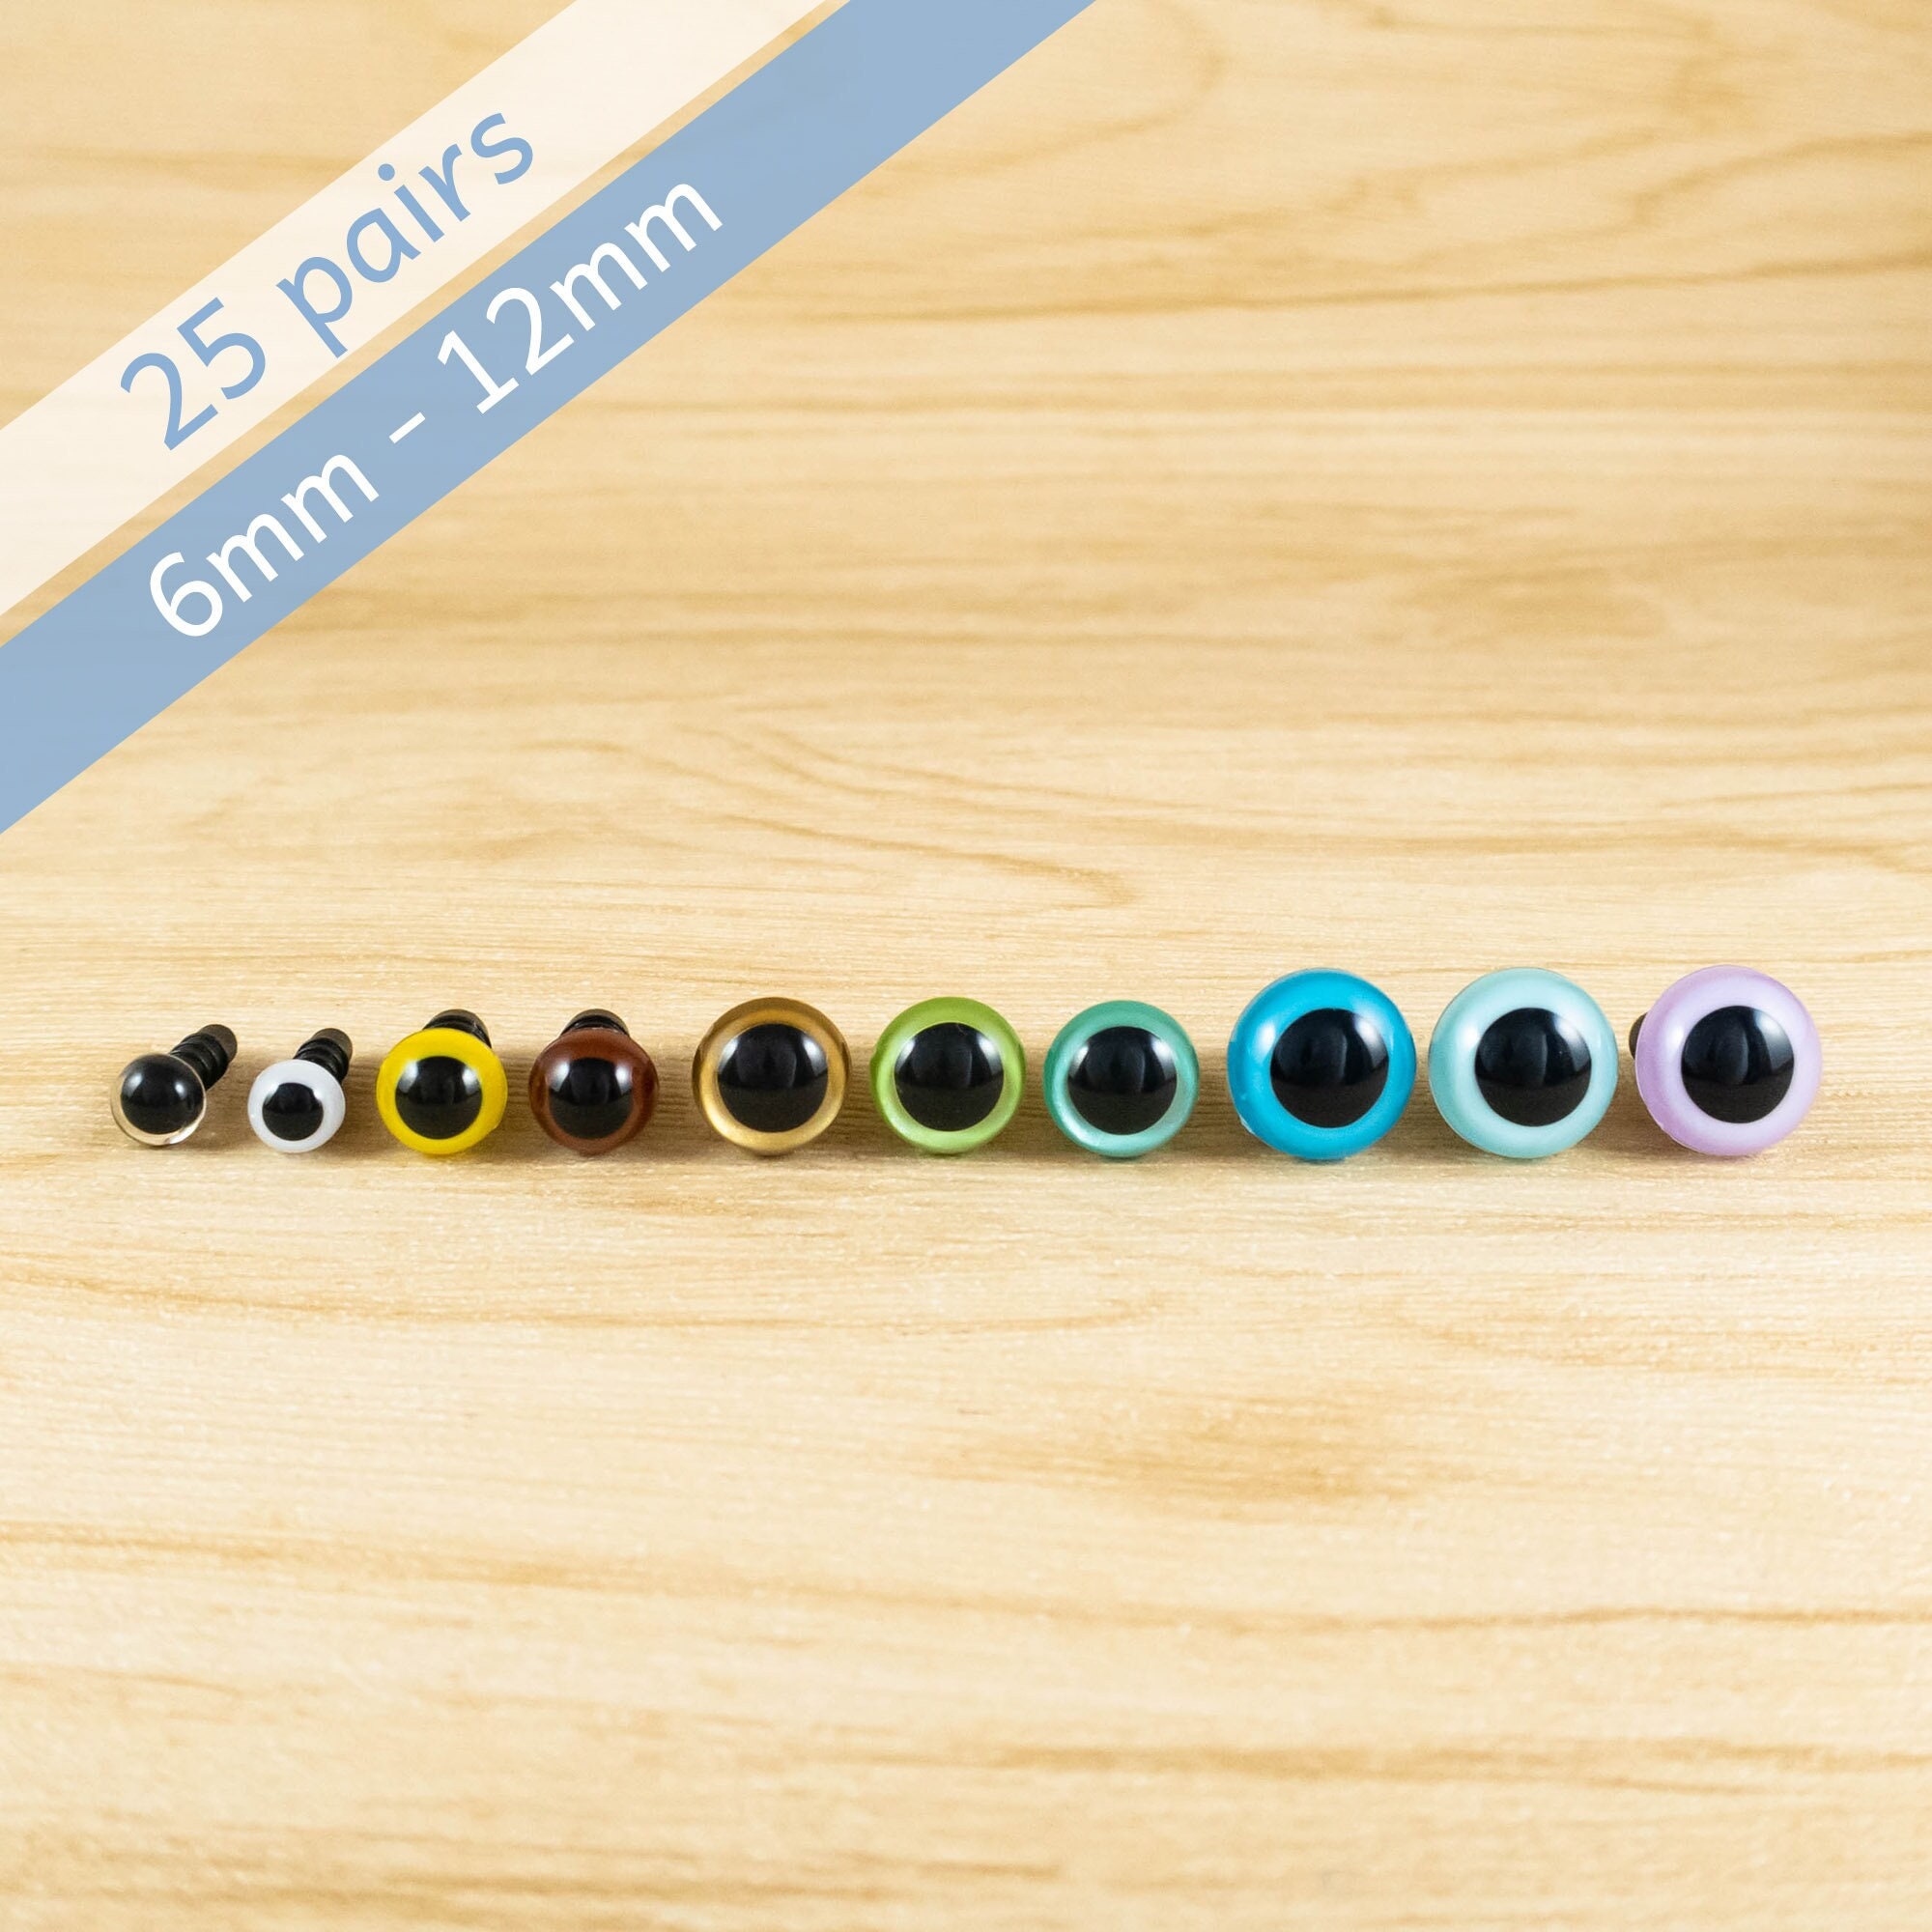 ITS PREORDER DAY! Which color is your favorite? Safety eyes will be av